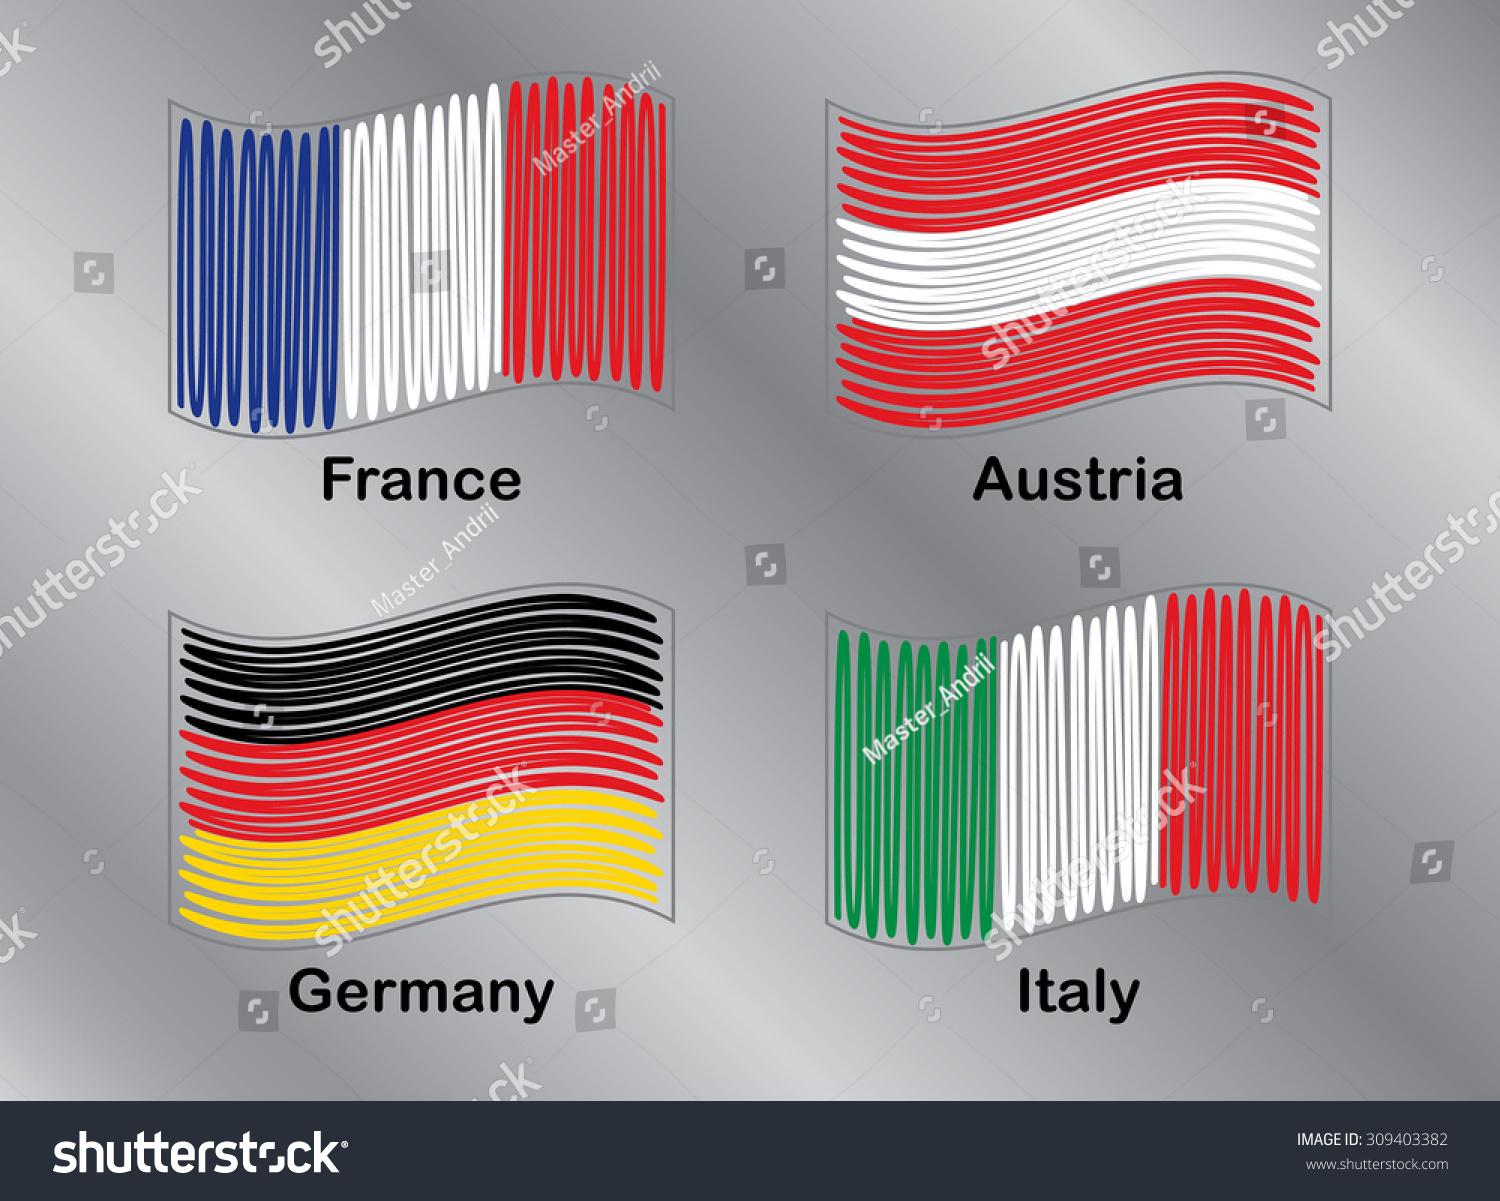 Flags Europe France Germany Austria Italy Stock Vector Royalty Free 309403382